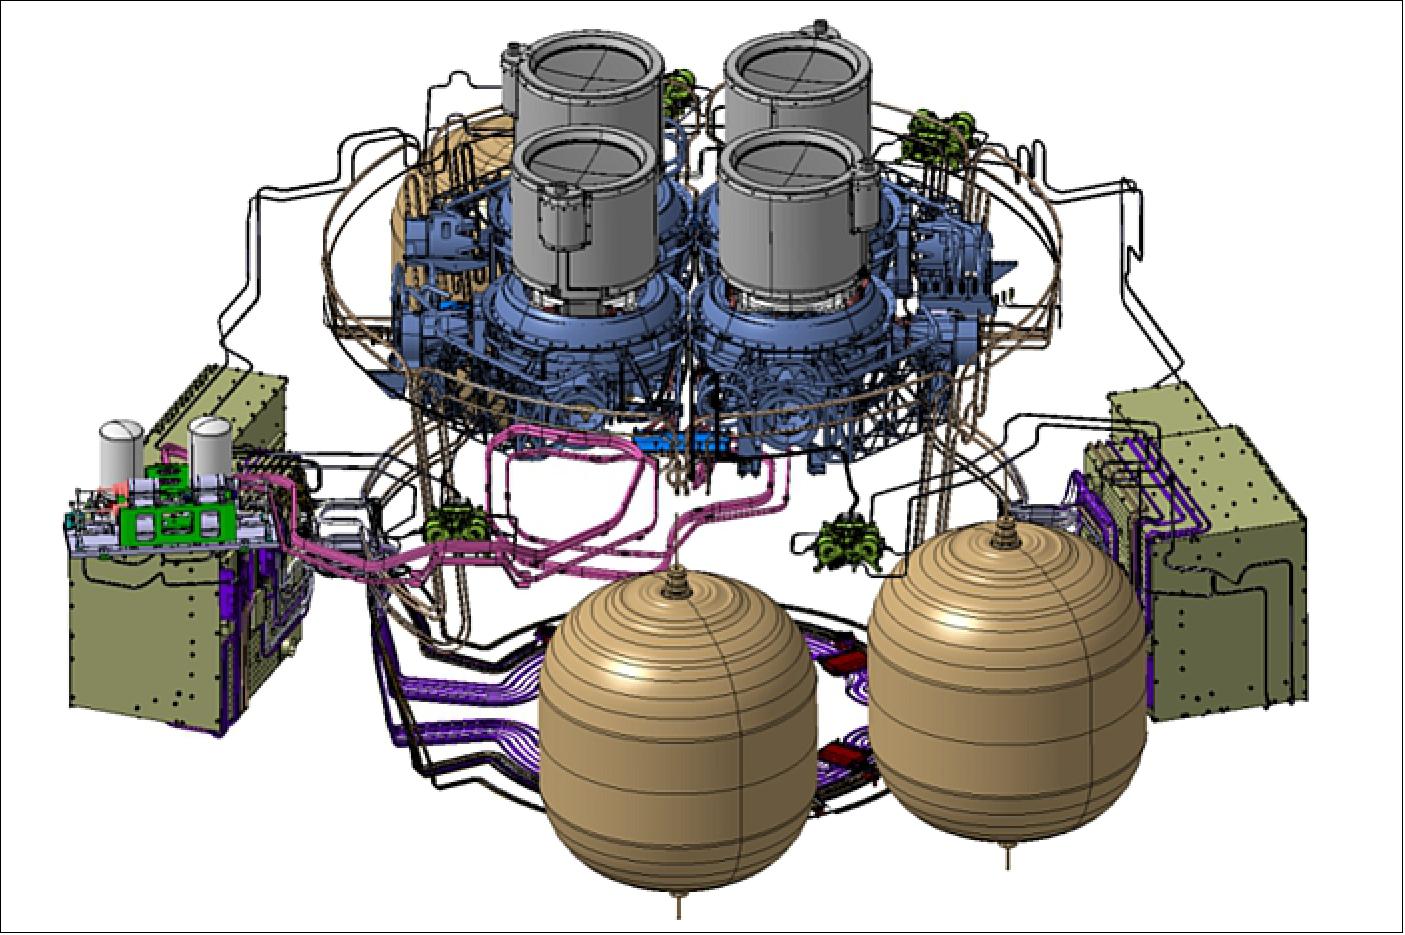 Figure 54: Along with the four T6 gridded ion thrusters, BepiColombo's Solar Electric Propulsion System also includes gimbal mechanisms for each thruster, three tanks of xenon gas, a high pressure regulator, four flow control units and two power processing units, providing the intelligence of the system. In addition several meters of high-voltage harness and piping are required to connect this complex system together (image credit: ESA)